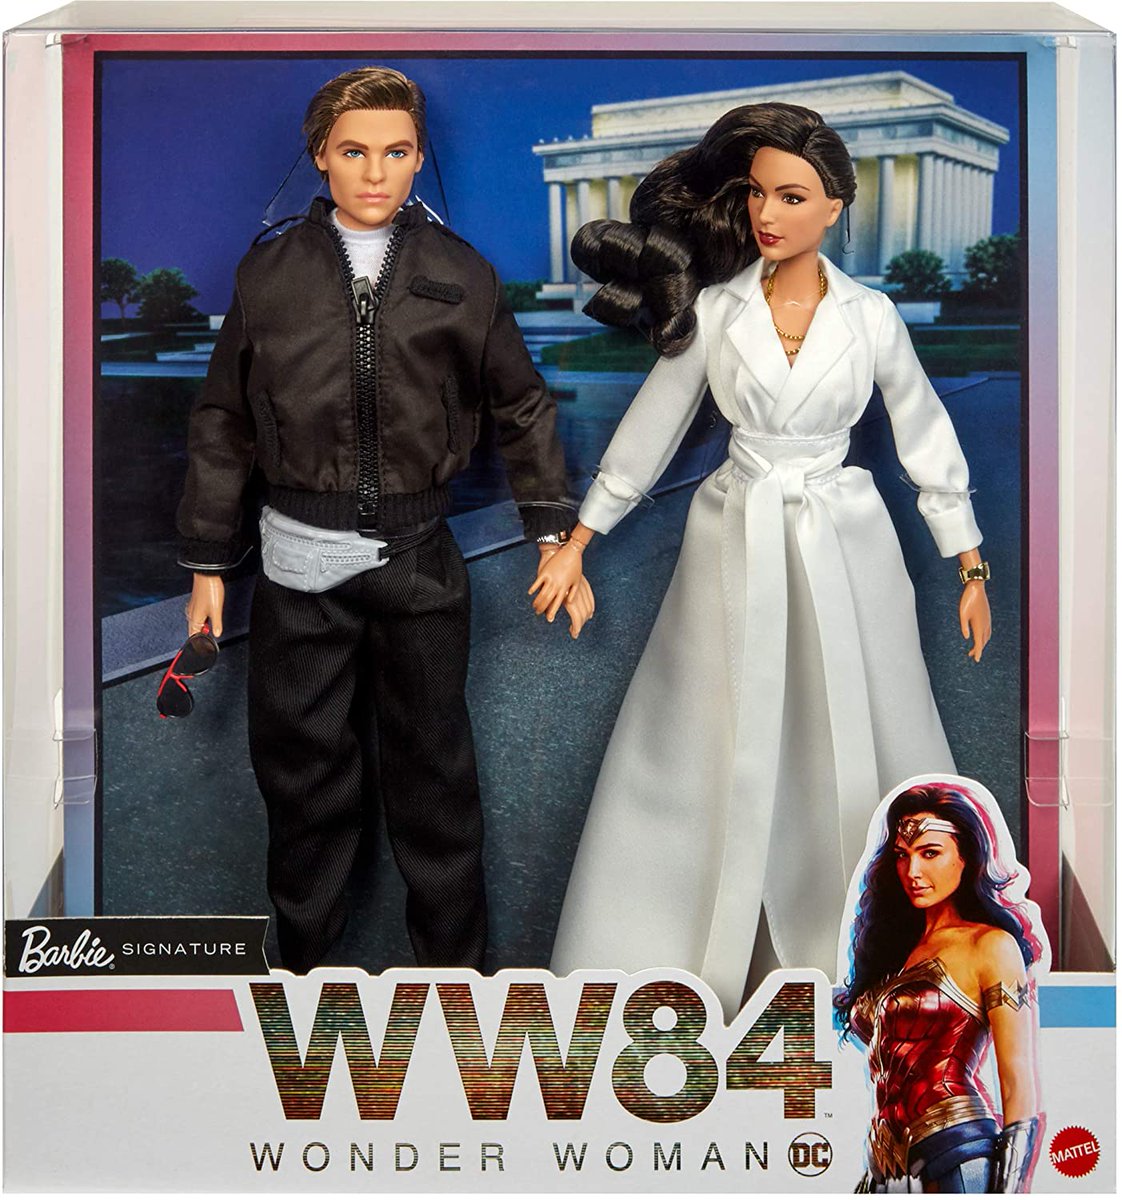 RT @ComicBookNOW: Wonder Woman 1984 Barbie Dolls: Diana and Steve are the New Barbie and Ken https://t.co/D1jbT2XvlX https://t.co/DbPT8xok5Q